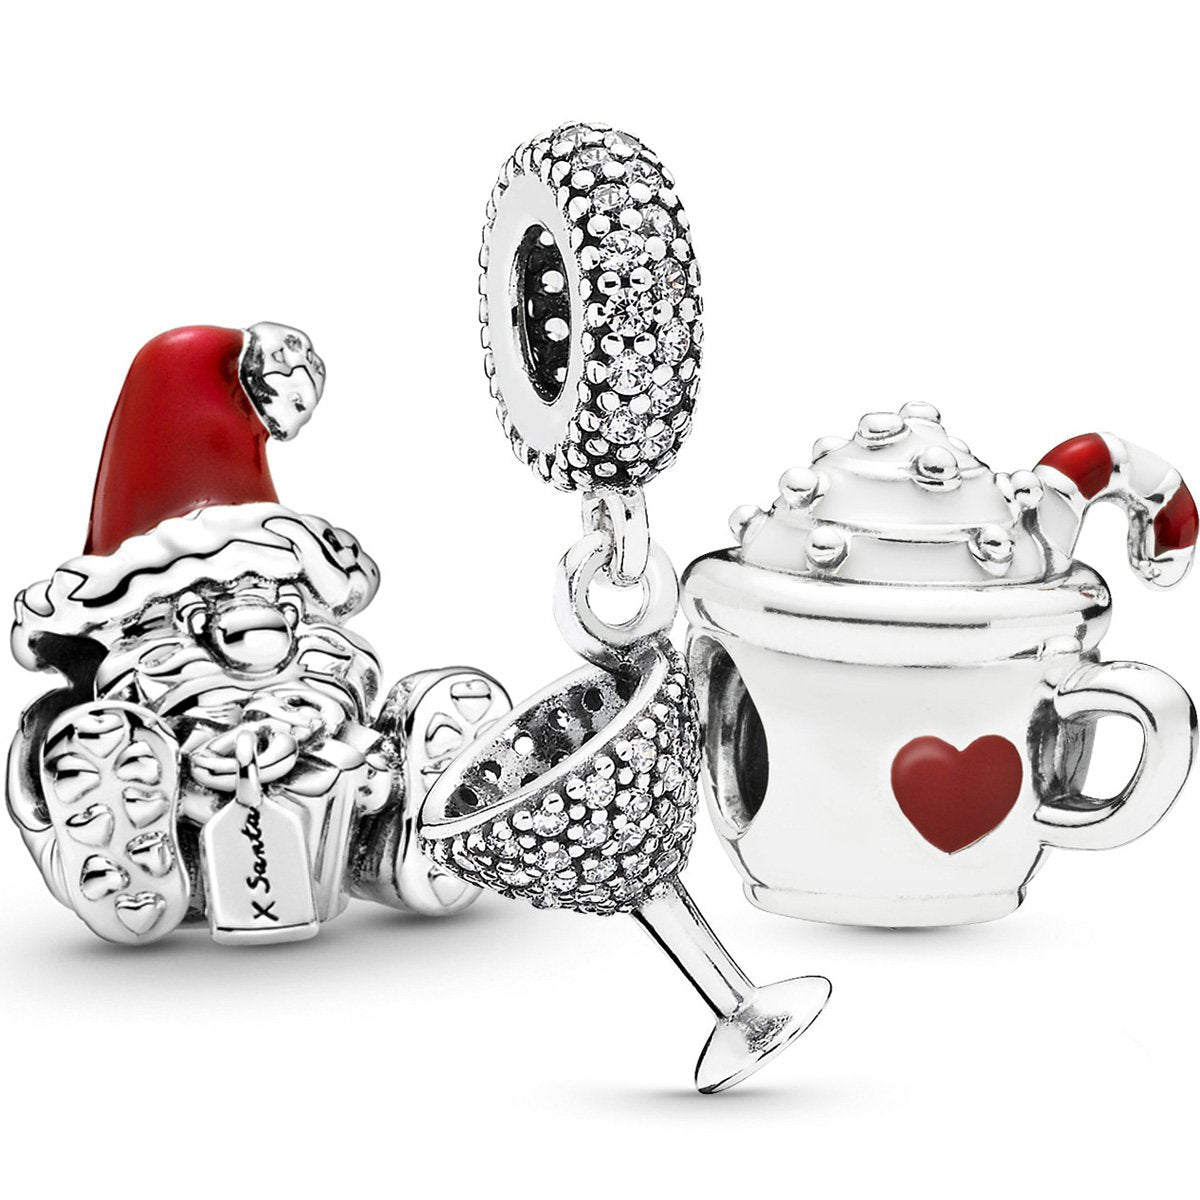 Drink Up Grinch's Charm Set